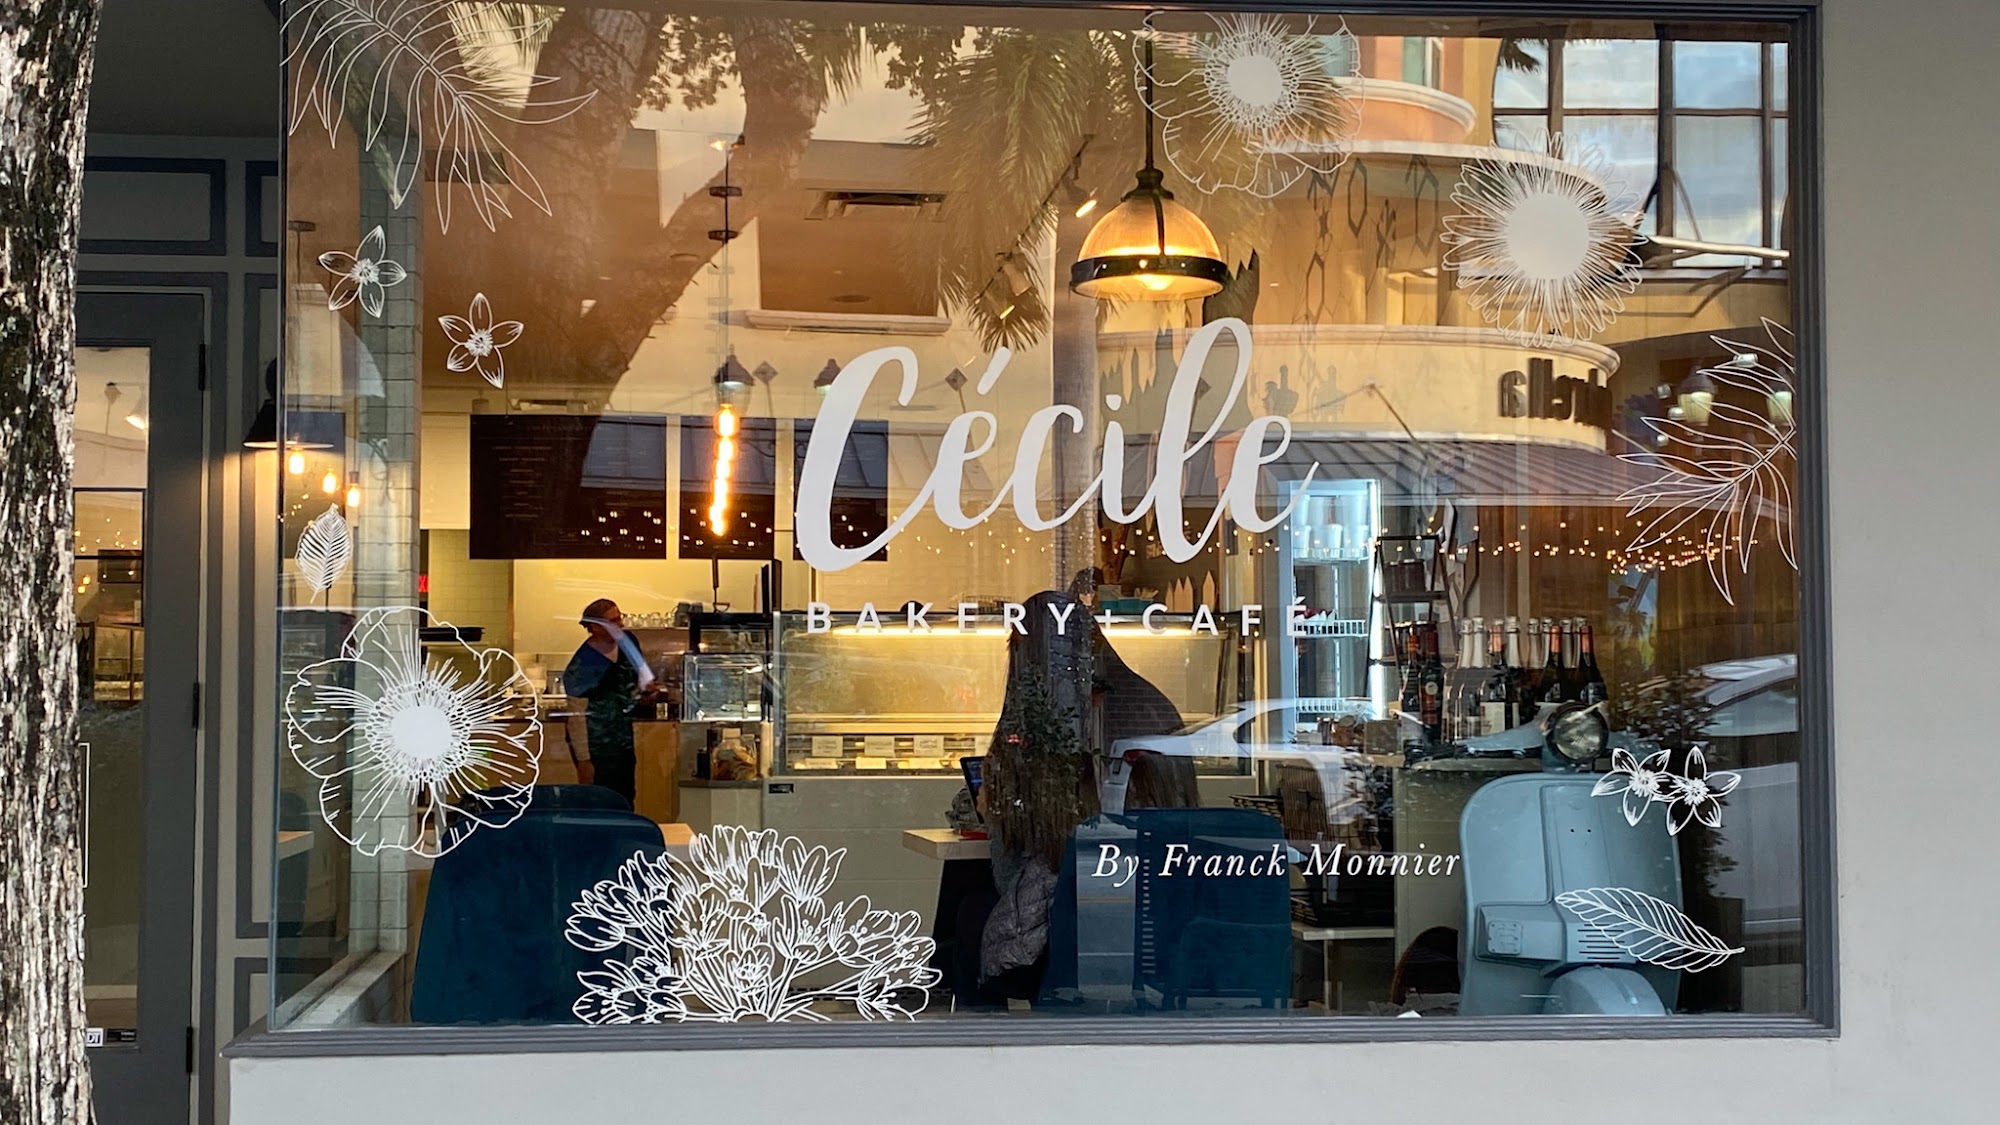 Cecile Bakery + Cafe